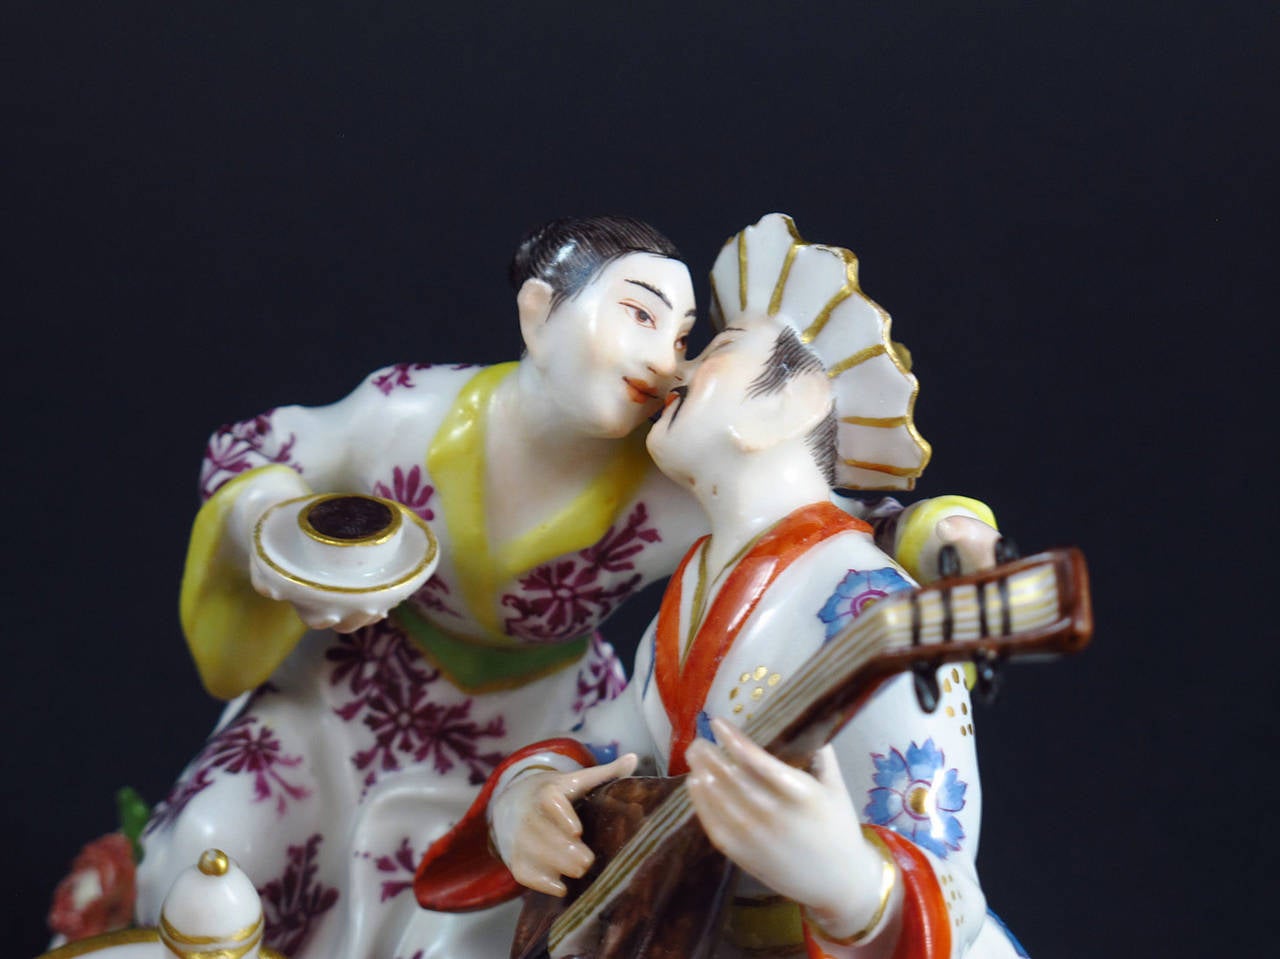 By Johann Joachim Kaendler
Meissen Model nr. 610

An Oriental couple is sitting behind a gilt-edged white tripod table covered with a coffee service. A parrot is sitting on one table leg. The lady is embracing the gentlemen who plays the lute.